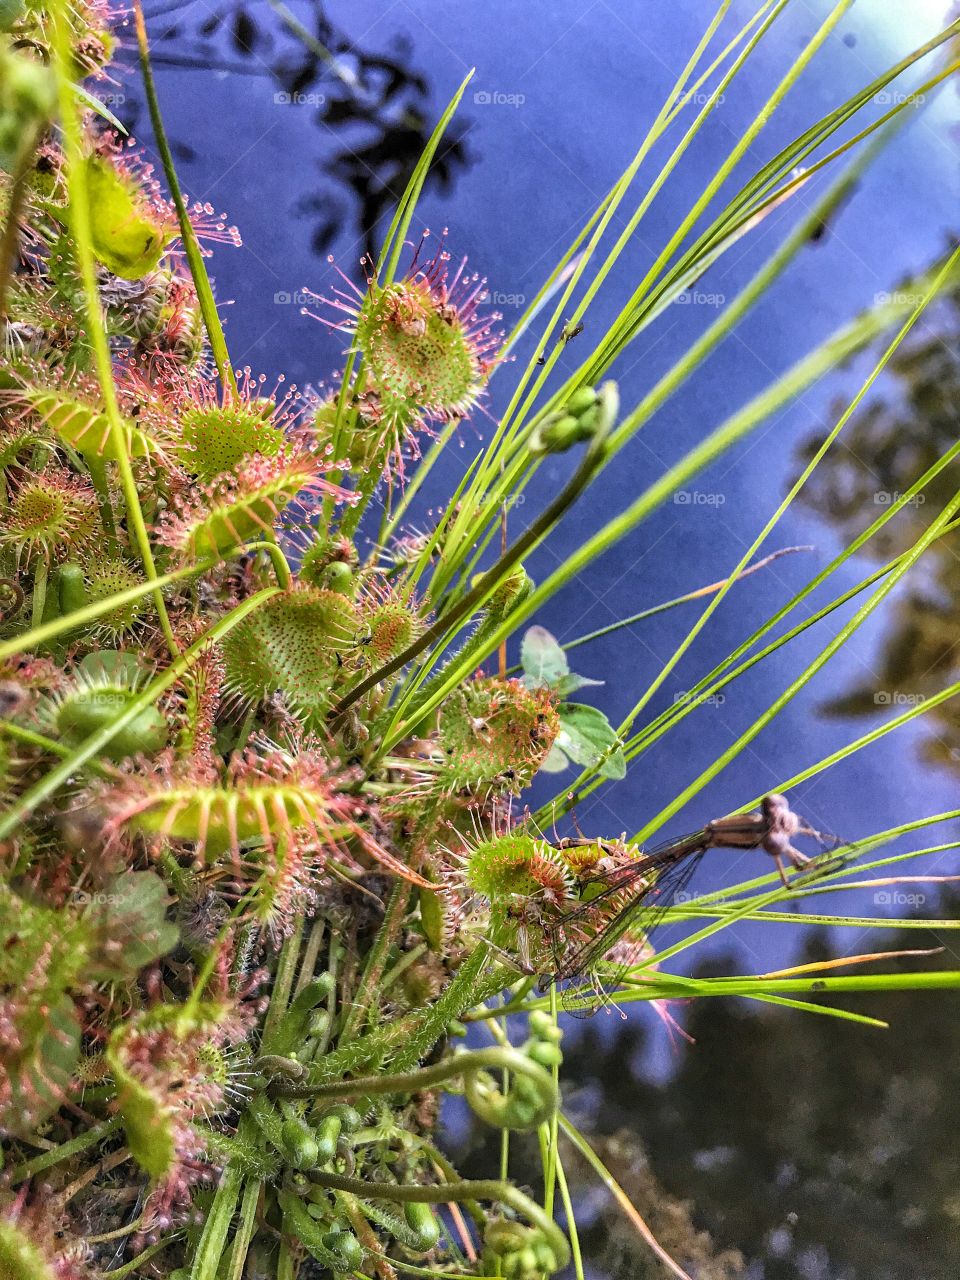 Sundew plant with dragon fly 